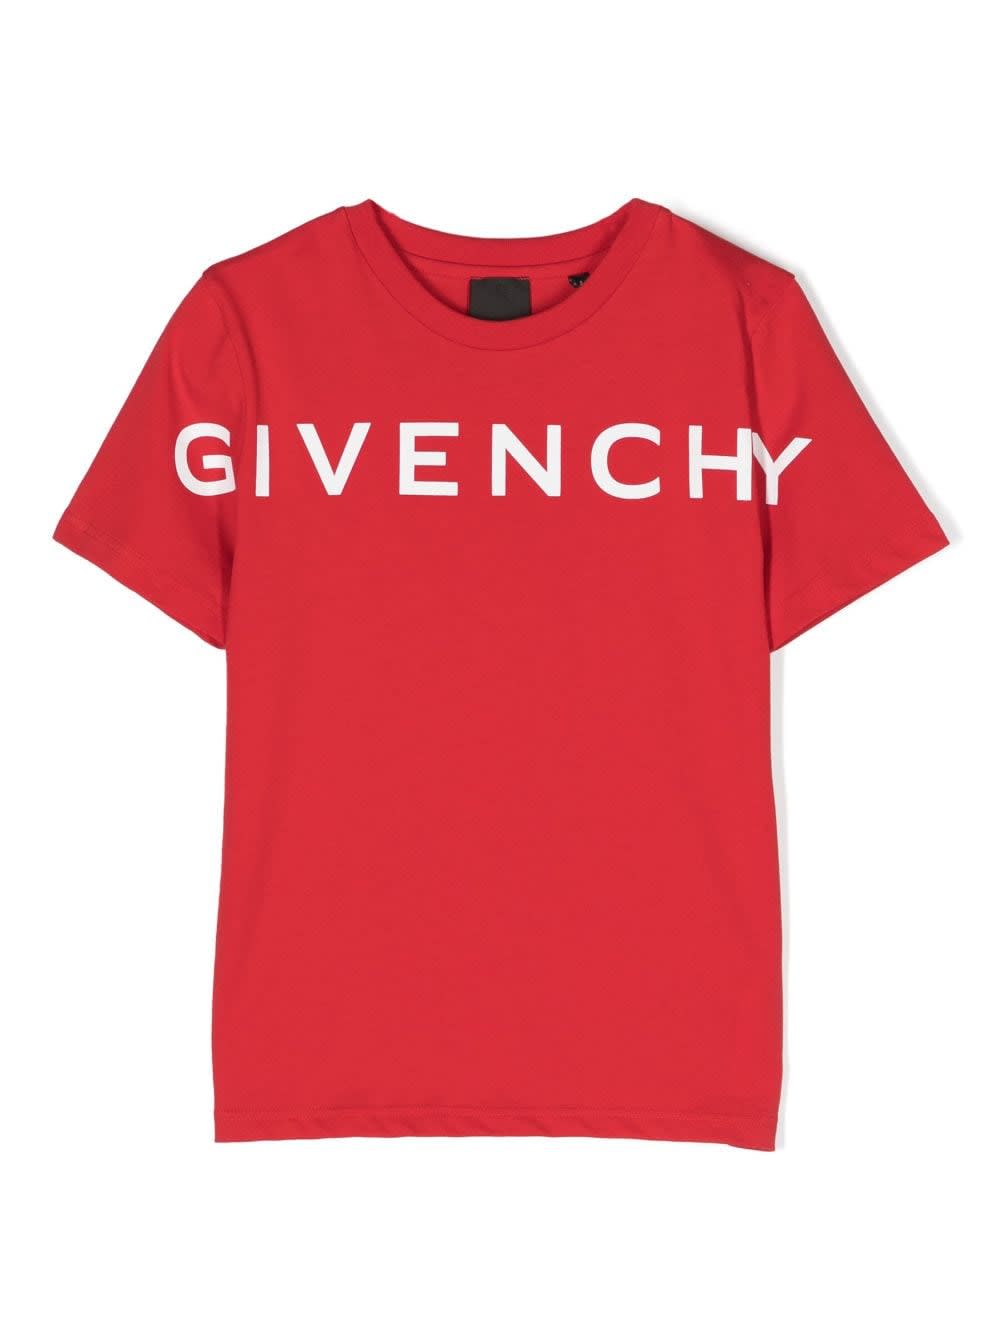 Givenchy T-shirt Rossa In Jersey Di Cotone Bambino